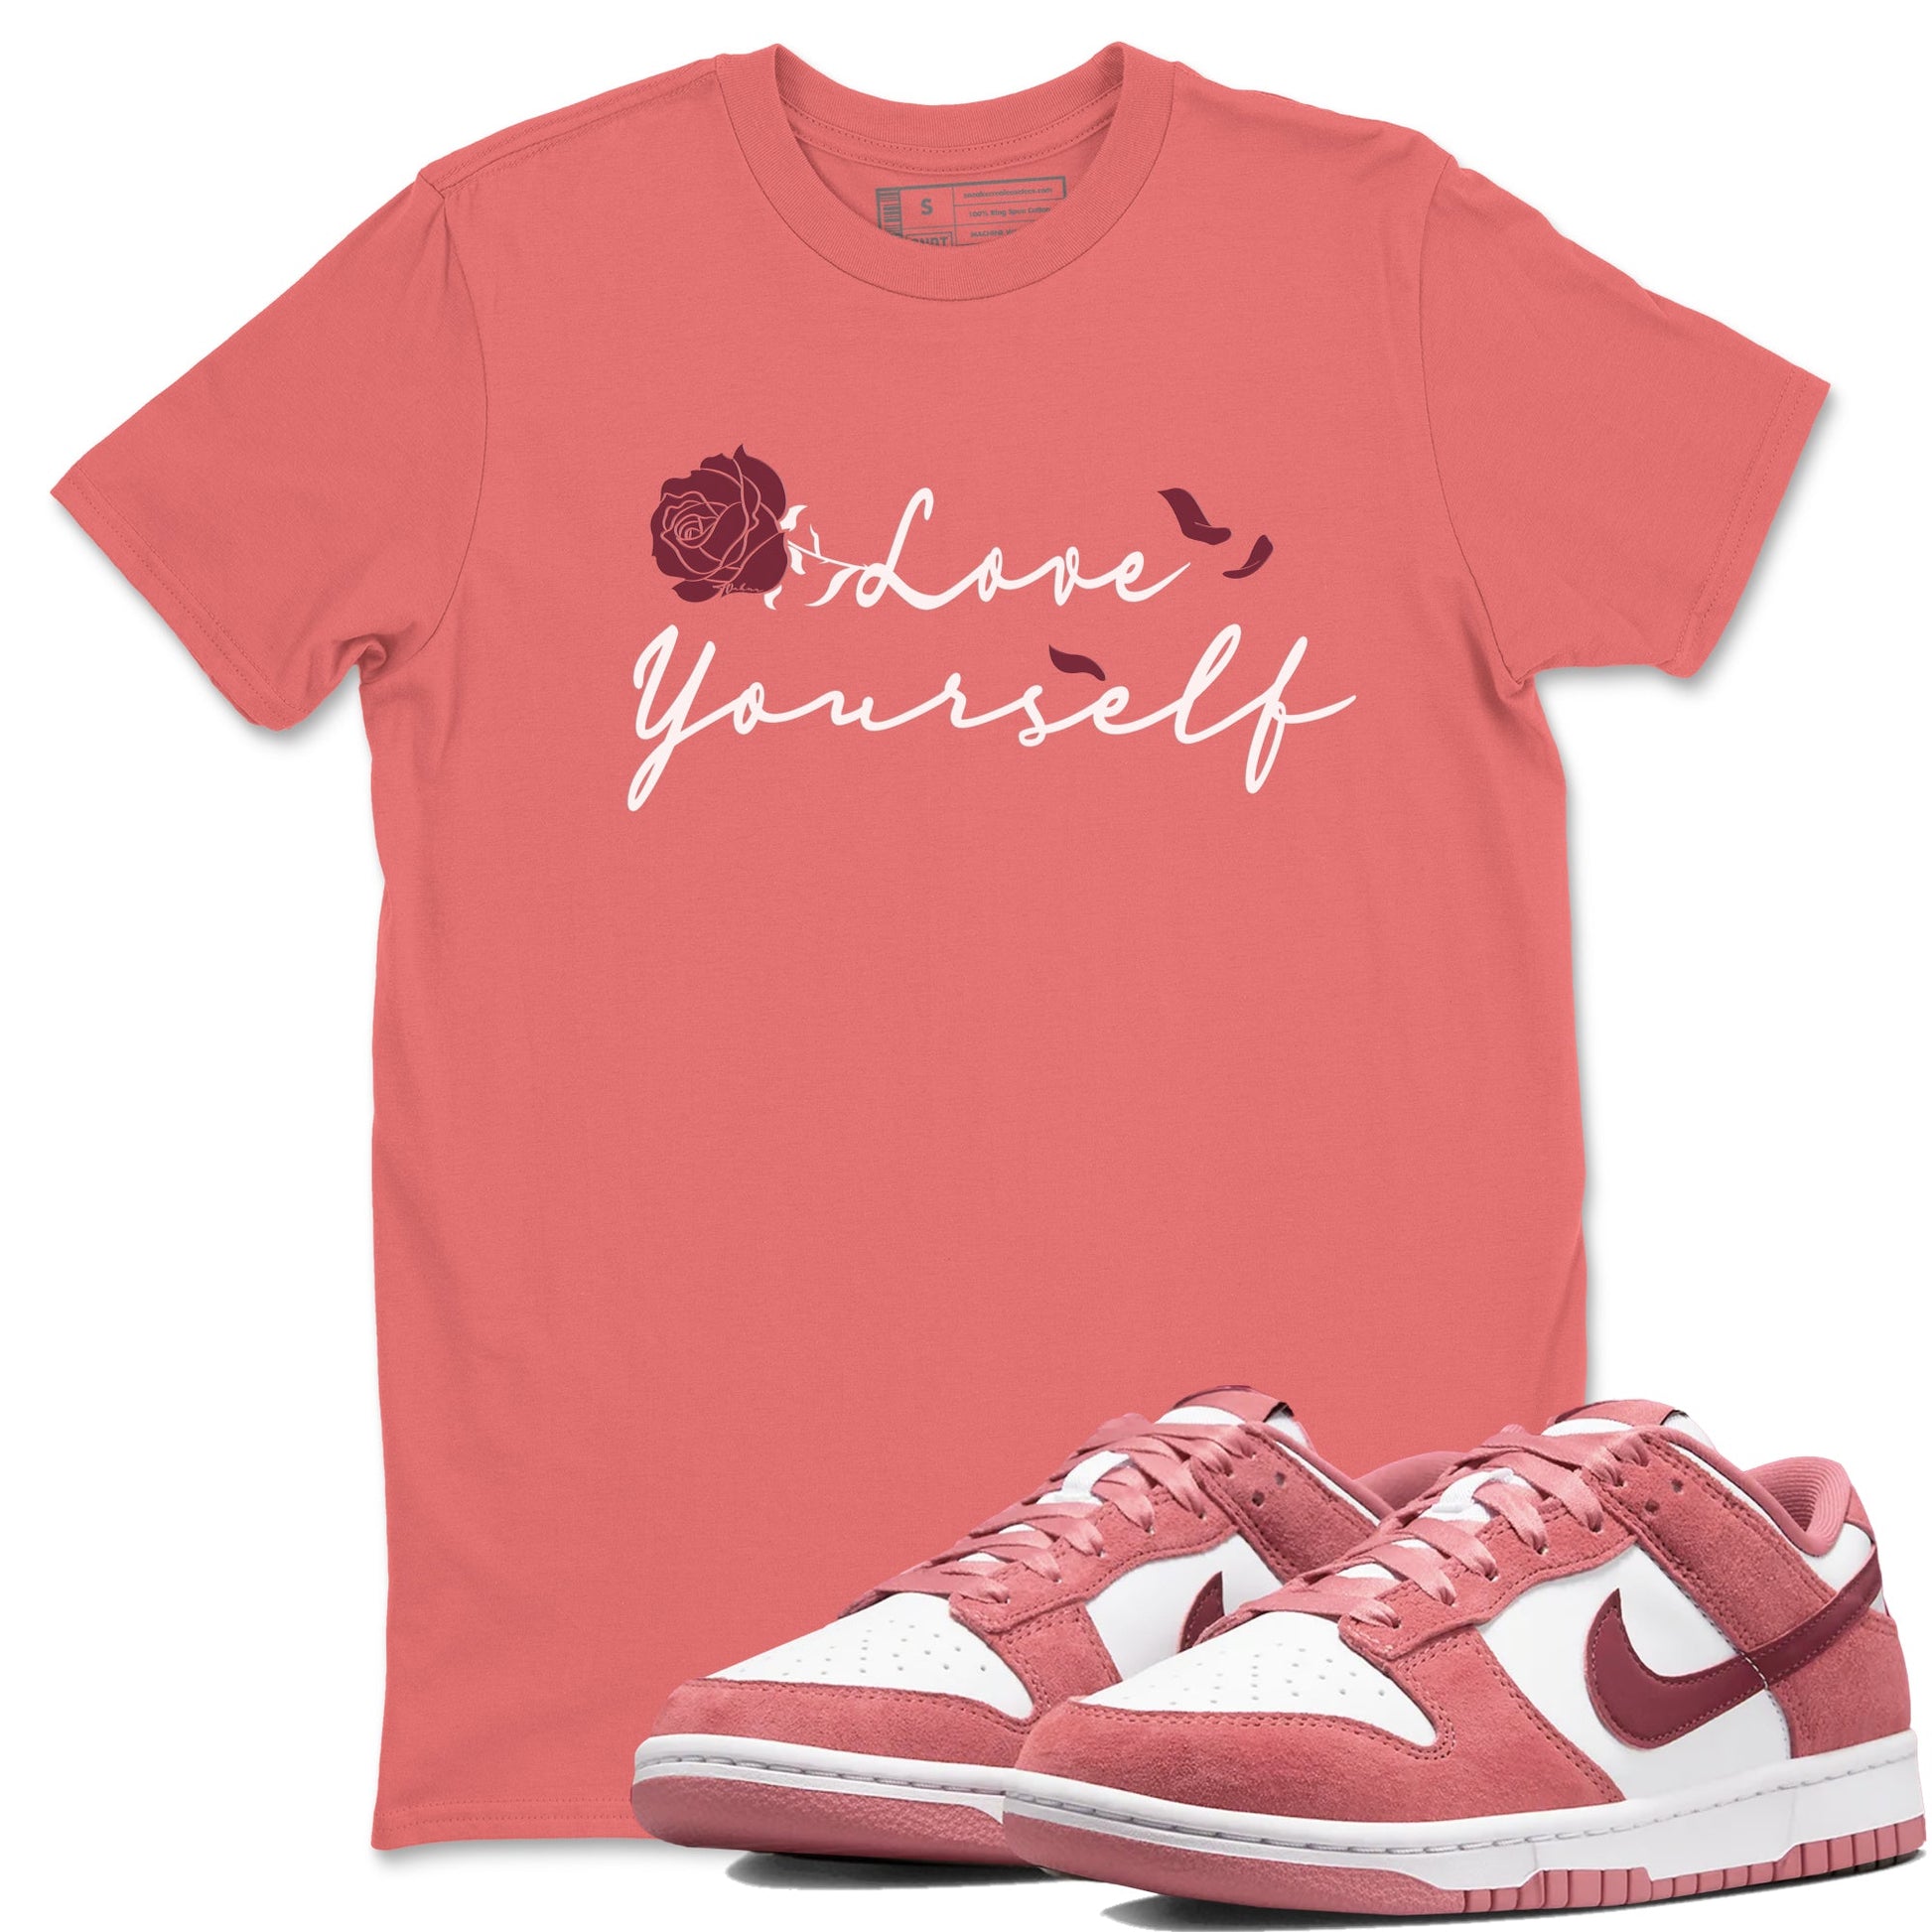 Dunk Valentine's Day shirt to match jordans Love Yourself sneaker tees Special Valentine Shirt Dunk Valentine's Day SNRT Sneaker Release Tees unisex cotton Coral 1 crew neck shirt